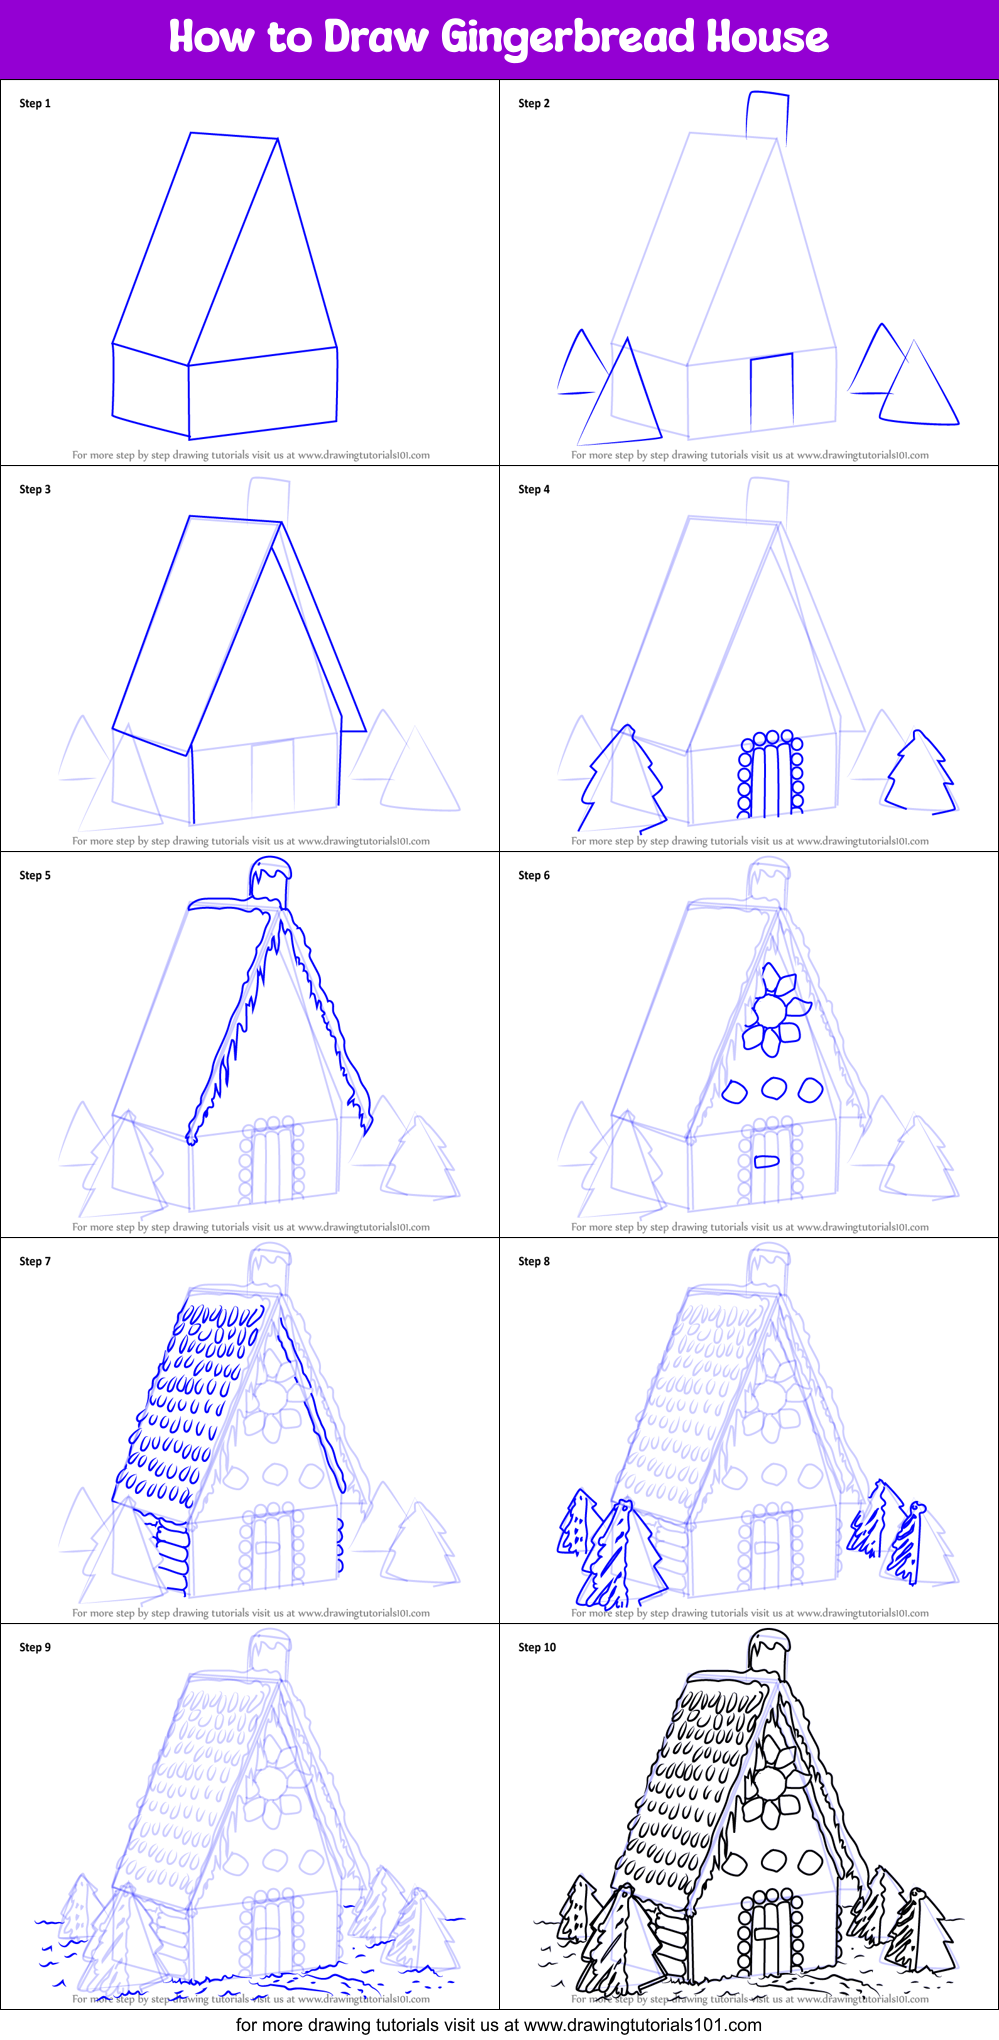 How to Draw Gingerbread House printable step by step drawing sheet